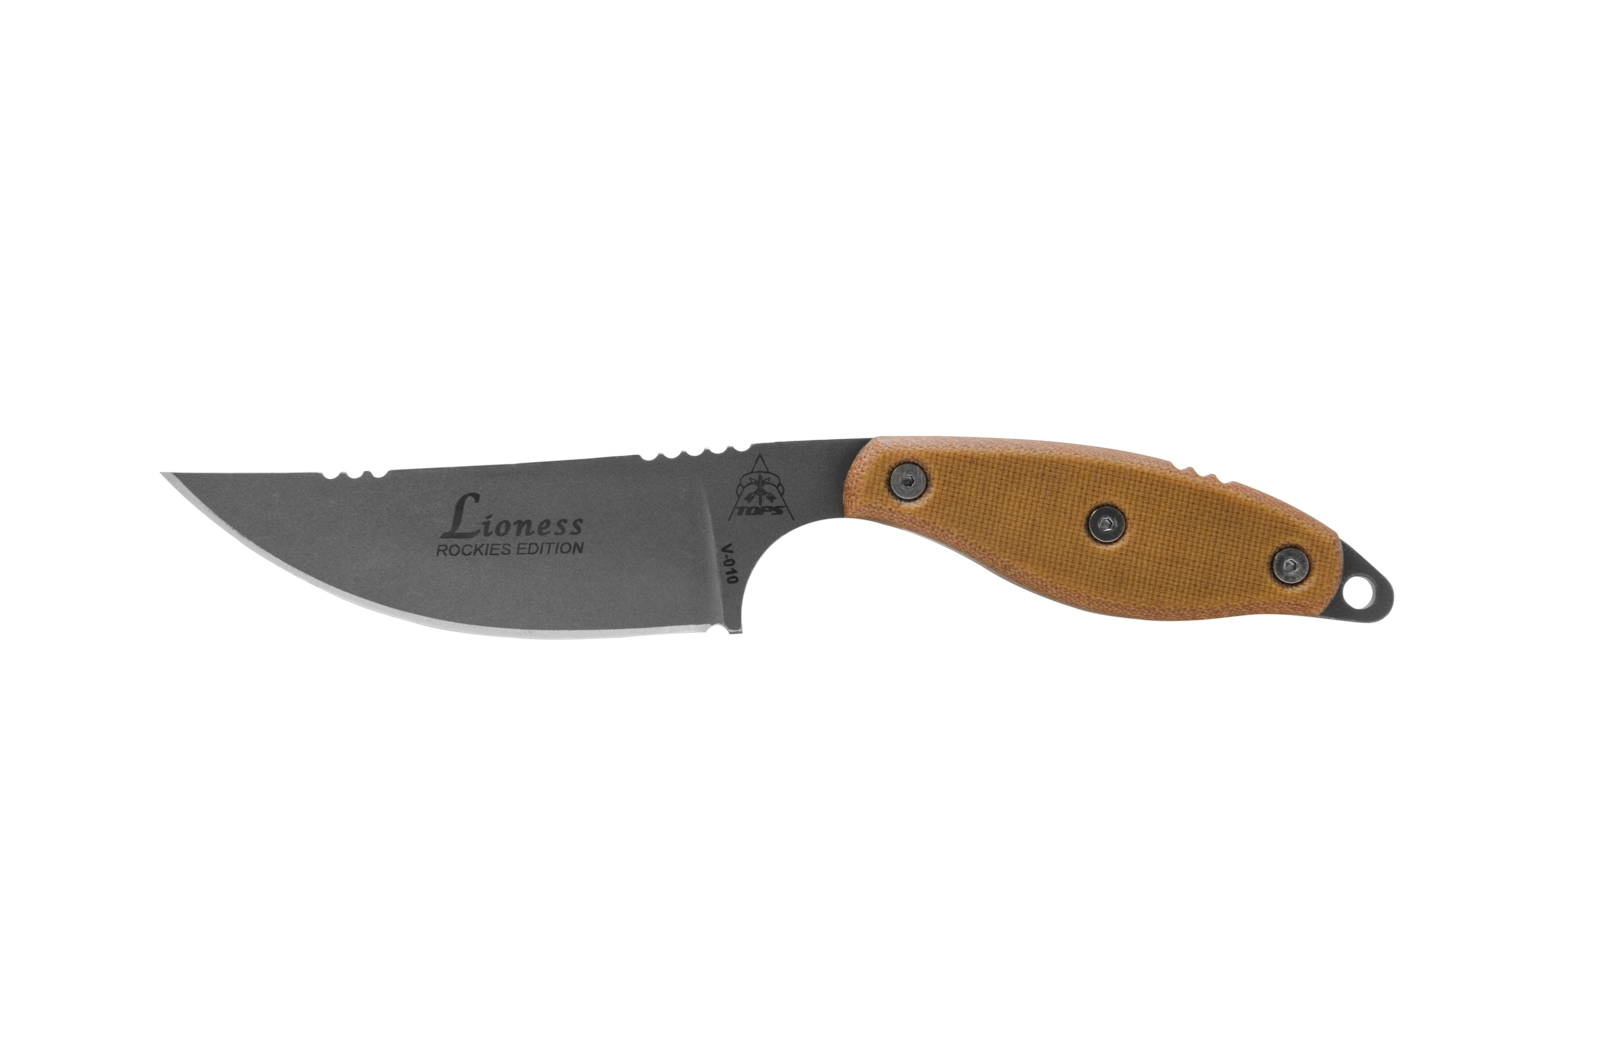 TOPS Knives now offers two new versions of Lioness Pattern – Knife Newsroom